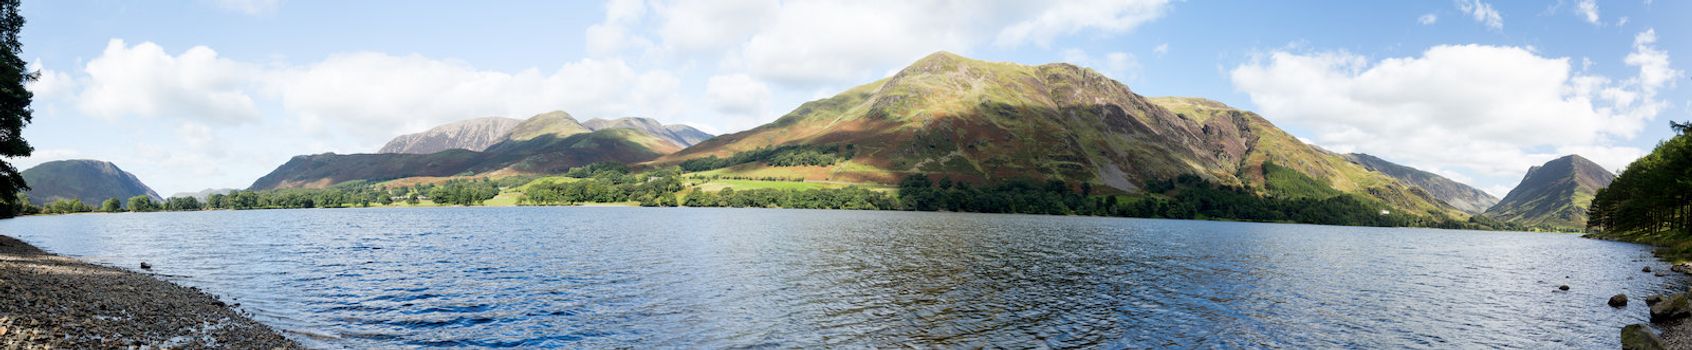 Mountains reflect into Buttermere calm lake in English Lake District